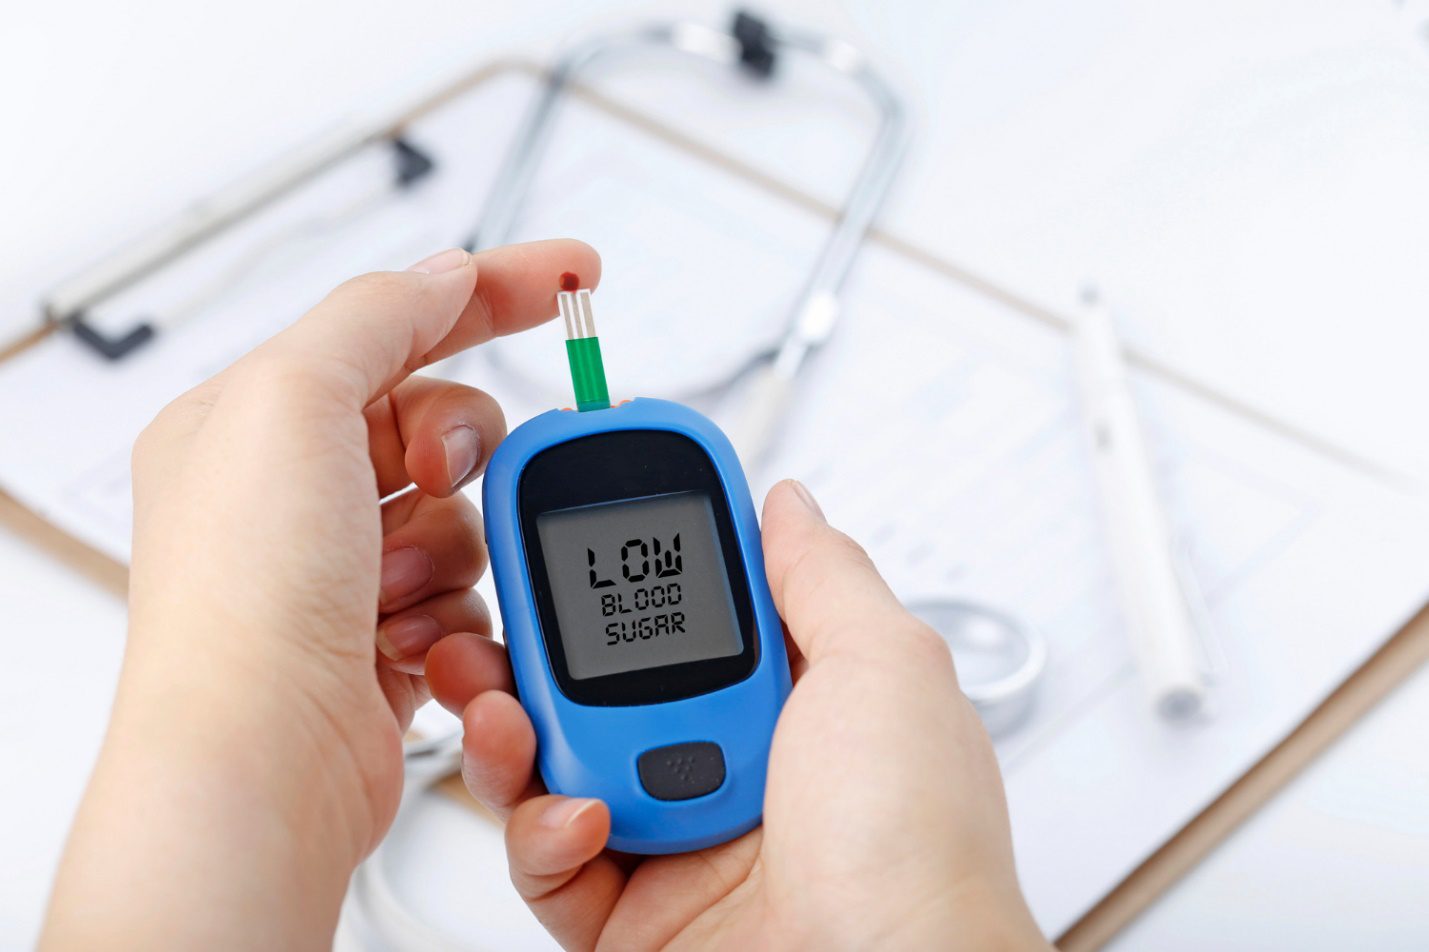 C:\Users\Dell\Downloads\hand-holding-blood-glucose-meter-measuring-blood-sugar-background-is-stethoscope-chart-file.jpg